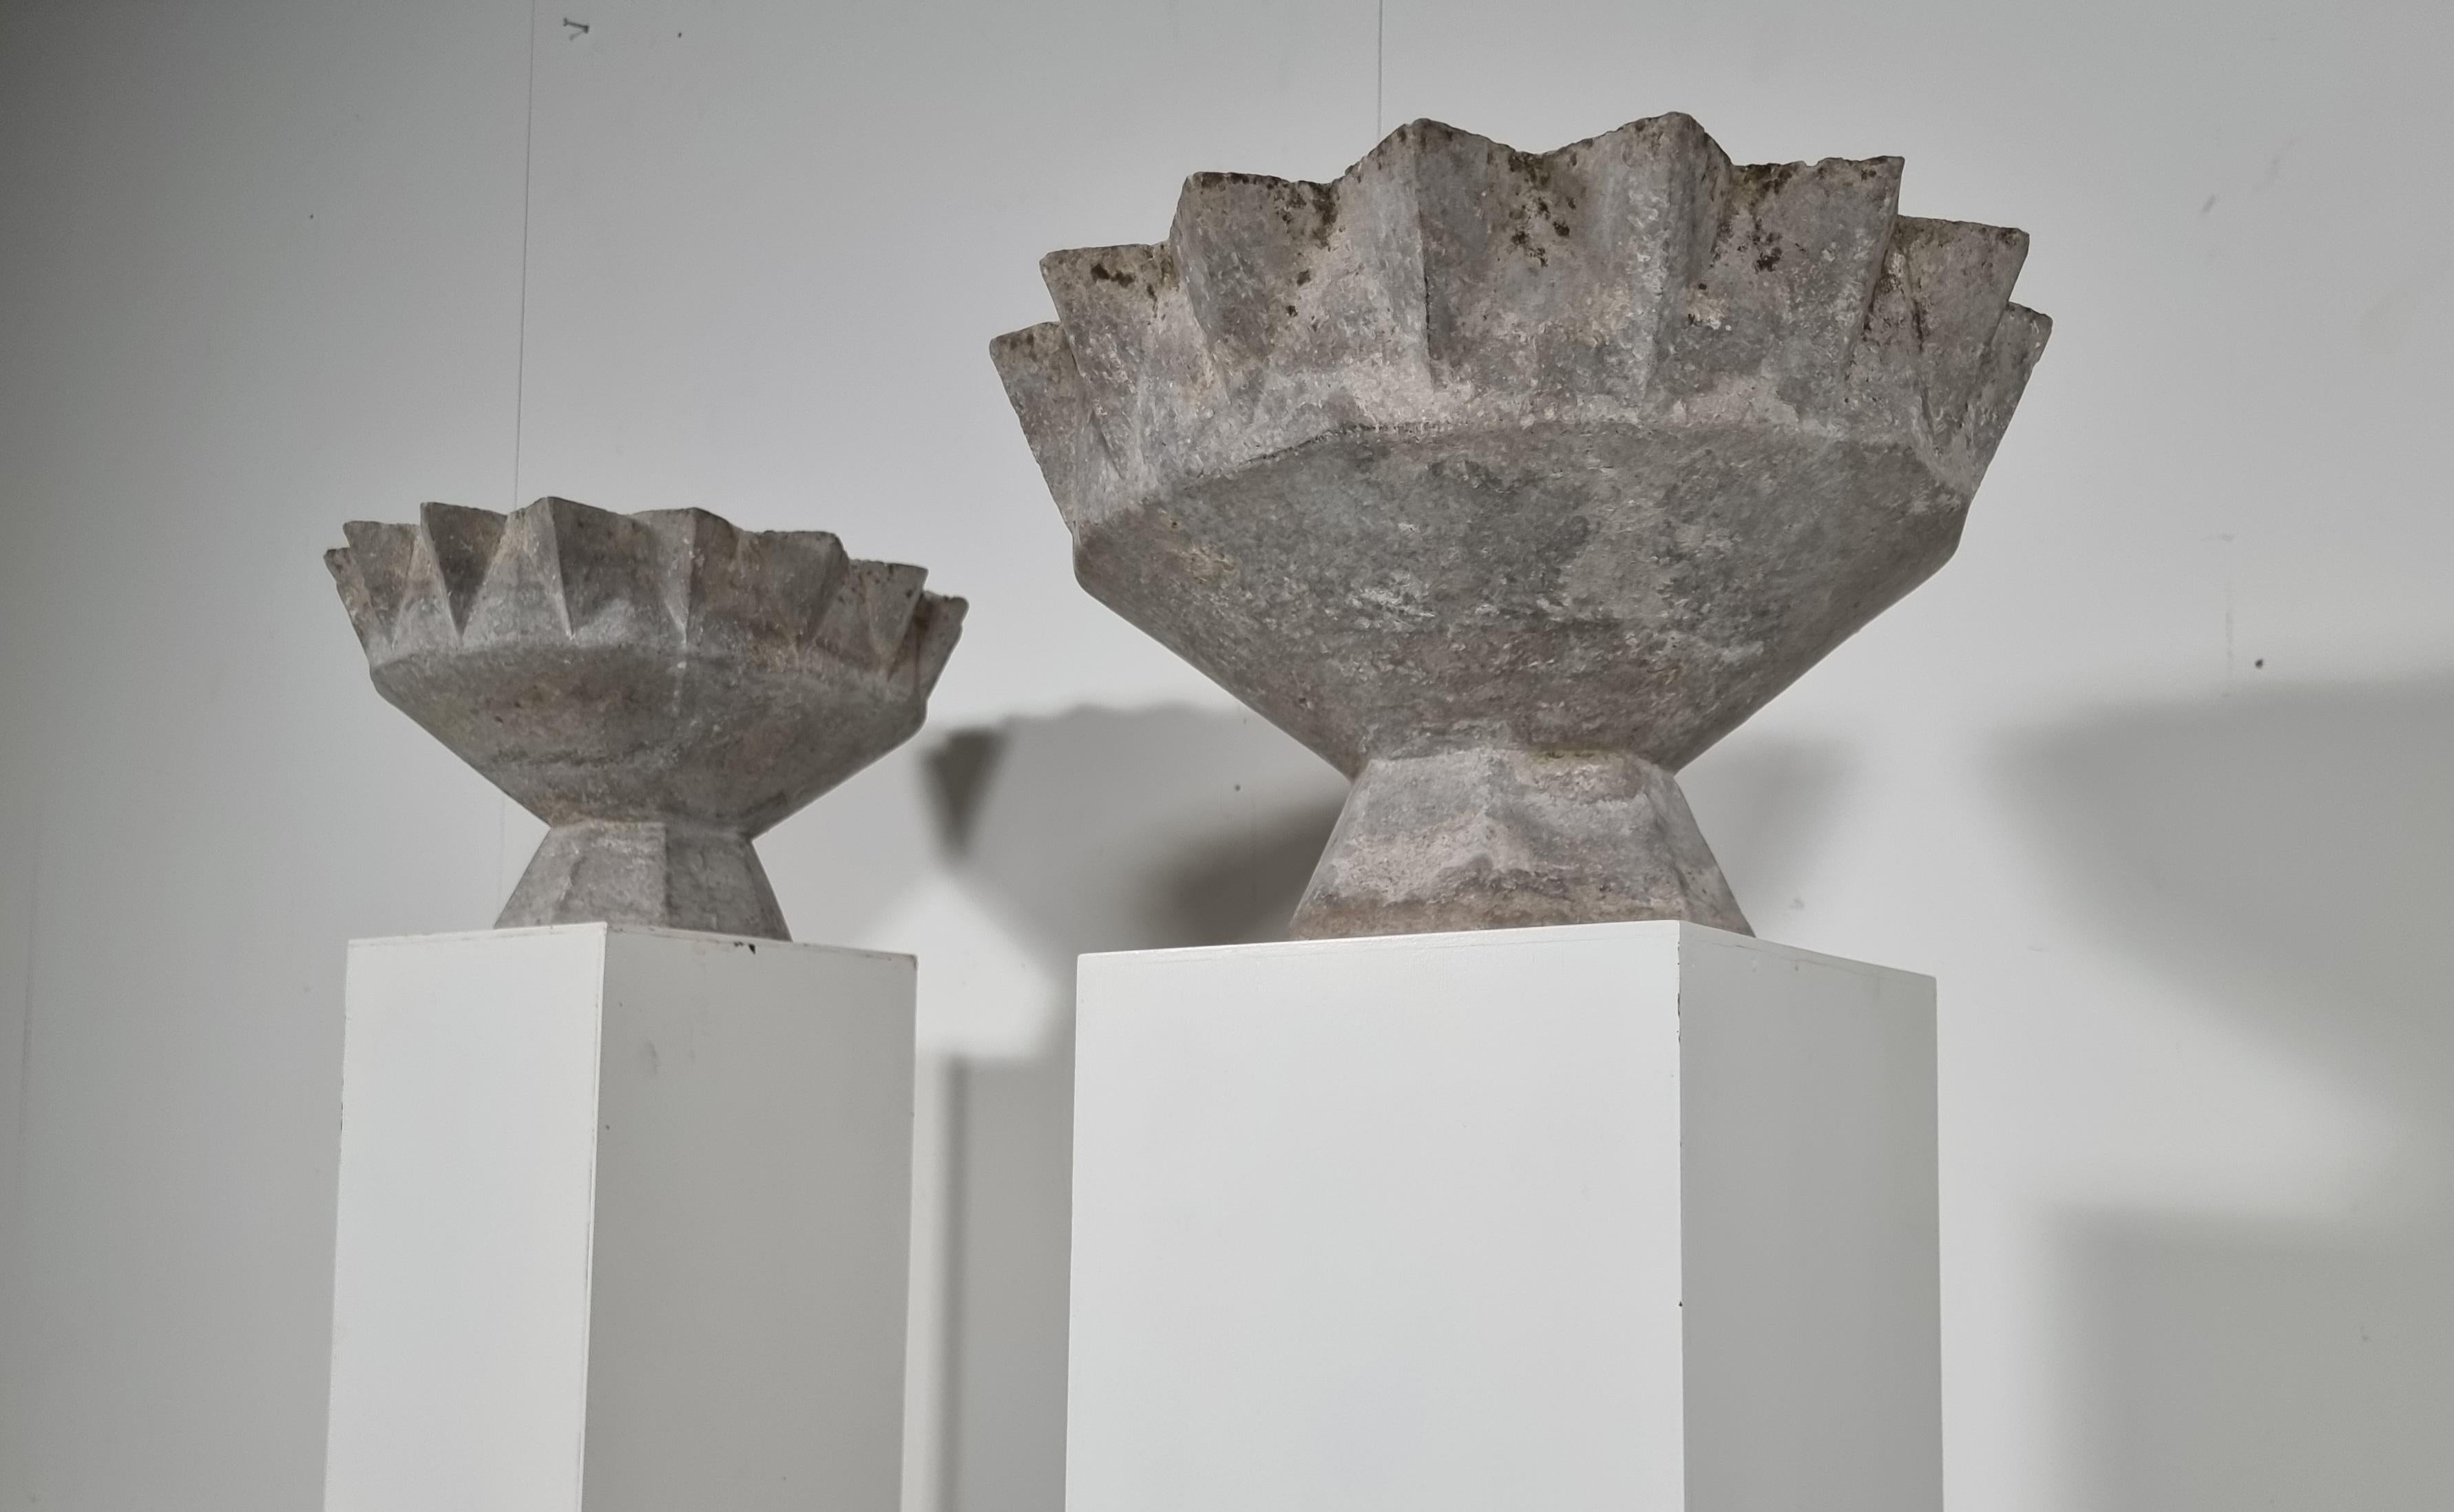 A unique set of 2 concrete planters by Swiss architect Willy Guhl. Planter in the shape of a chalice.  Signed 1972.

 This shape is not common and hard to find. Great patina. Would make a lovely planter inside or out. 

1 platner has a crack but it